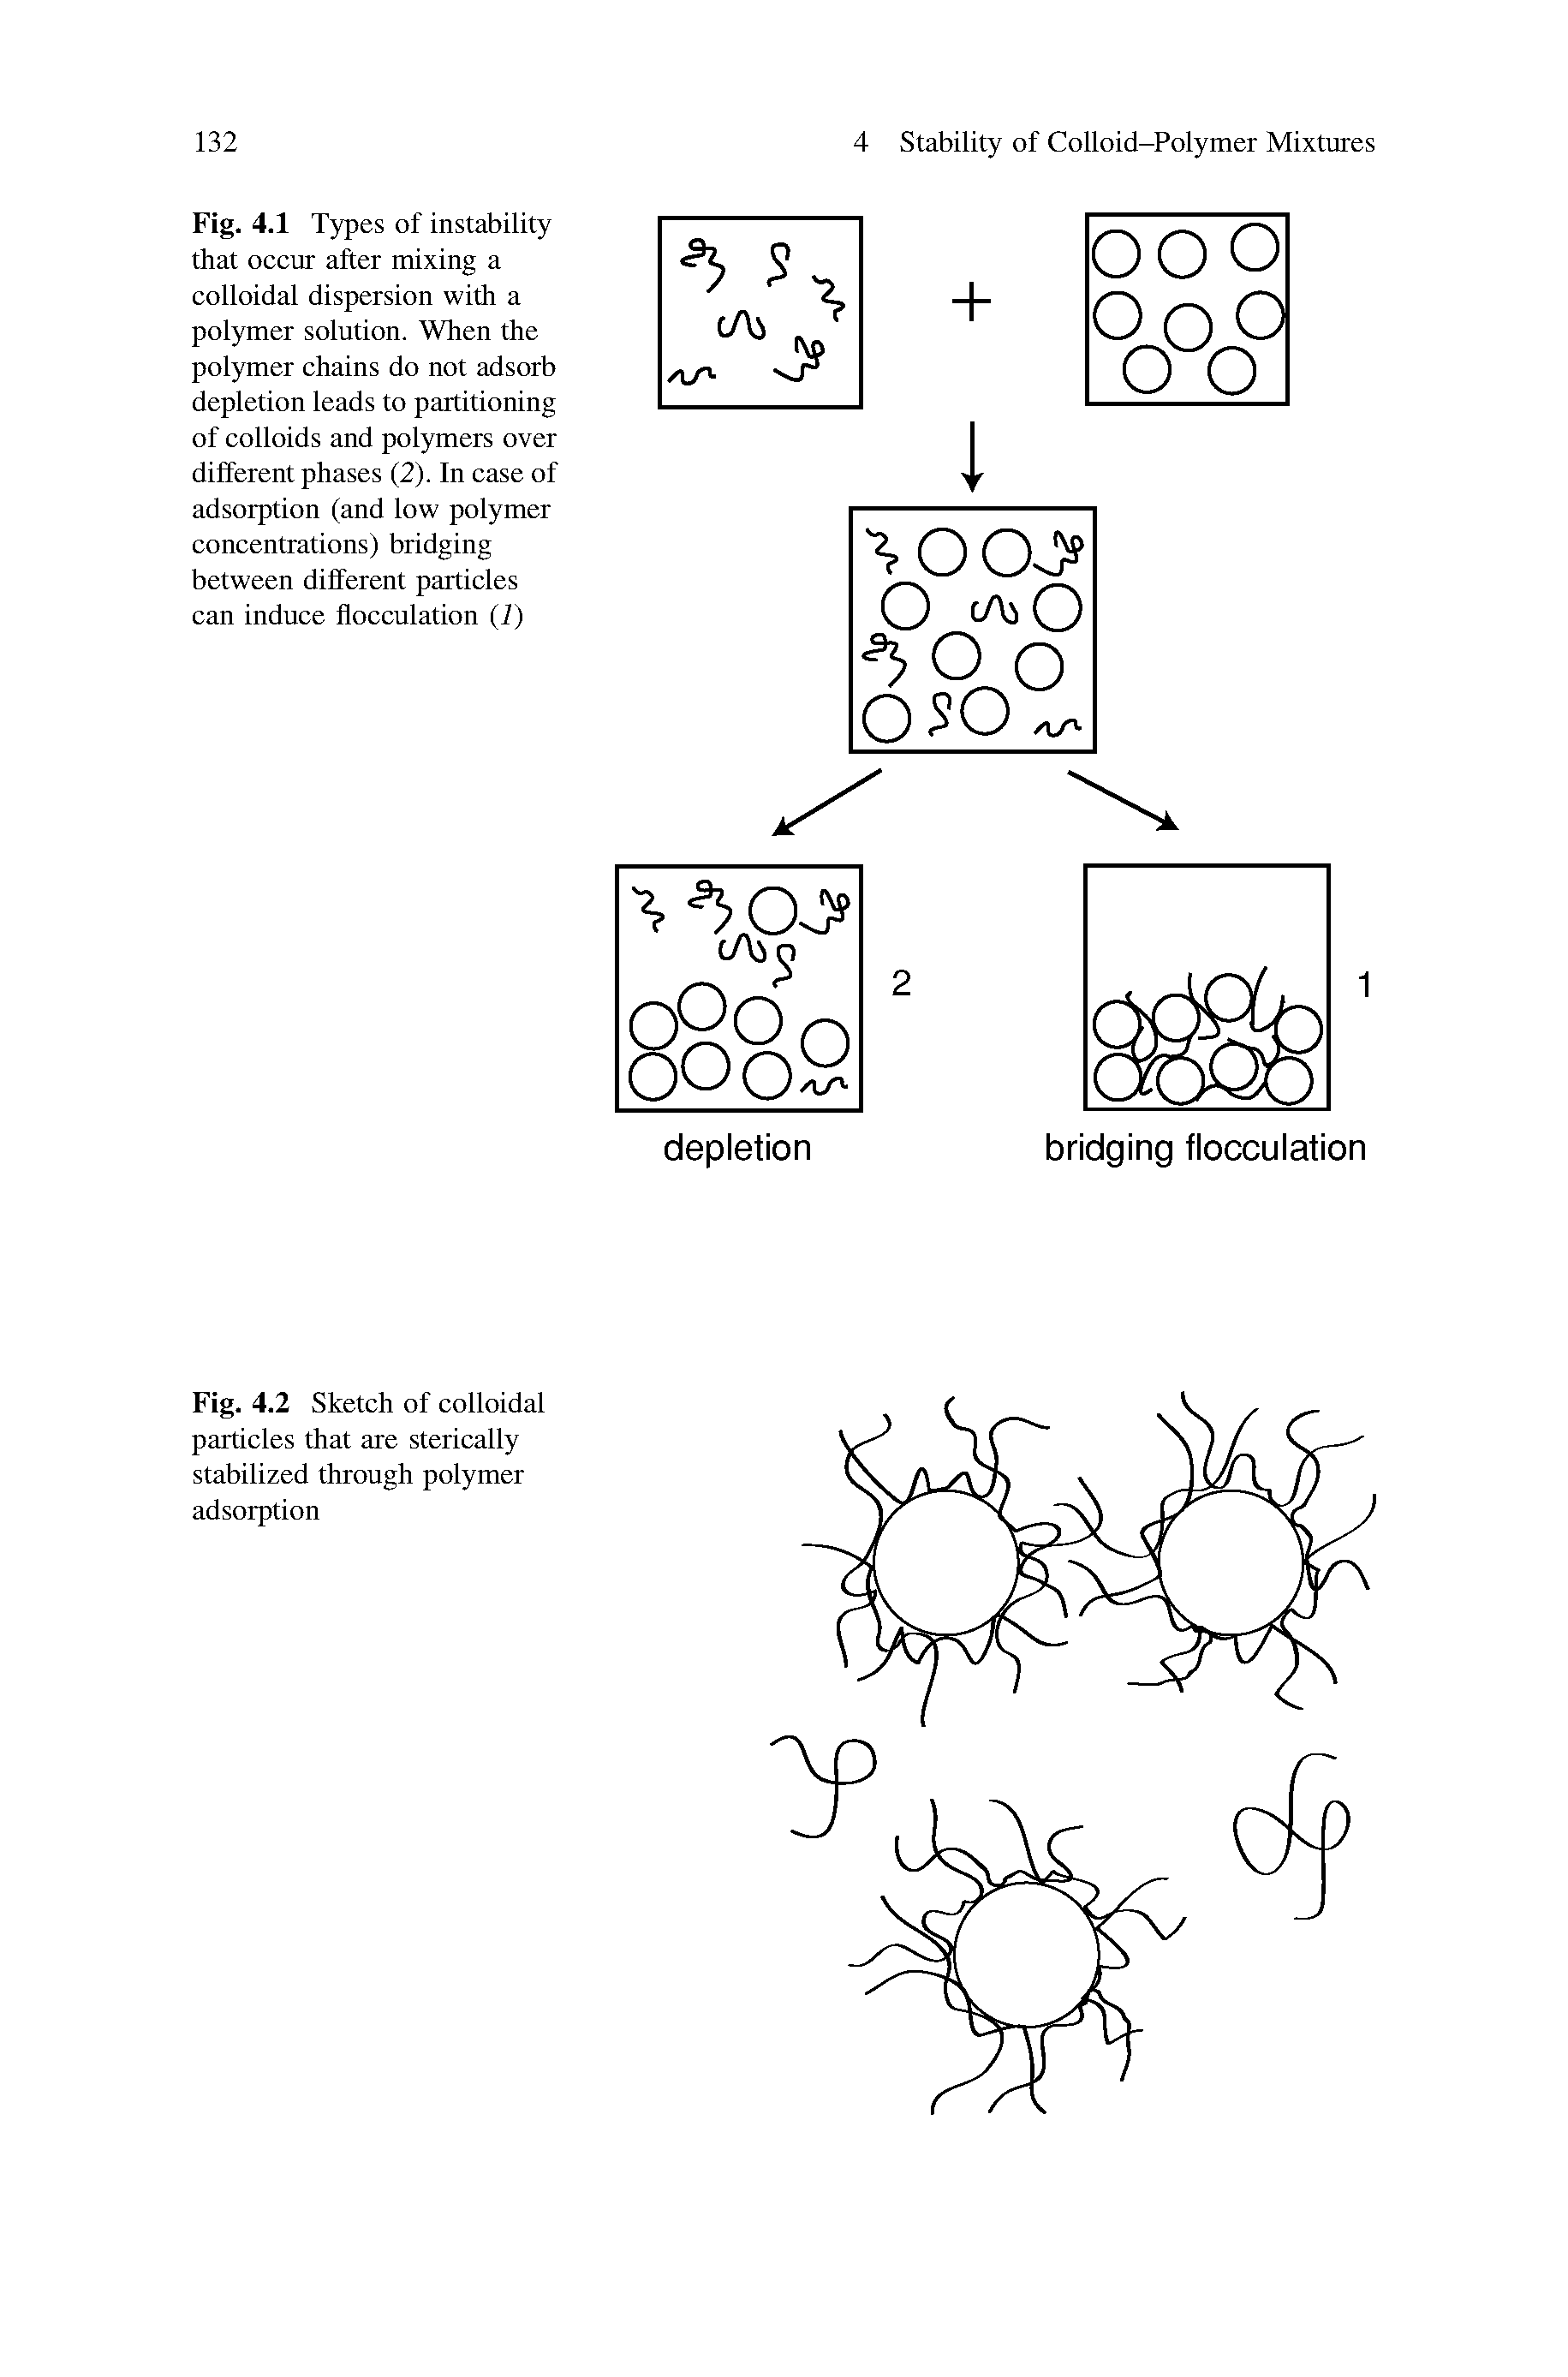 Fig. 4.1 Types of instability that occur after mixing a colloidal dispersion with a polymer solution. When the polymer chains do not adsorb depletion leads to partitioning of colloids and polymers over different phases (2). In case of adsorption (and low polymer concentrations) bridging between different particles can induce flocculation (1)...